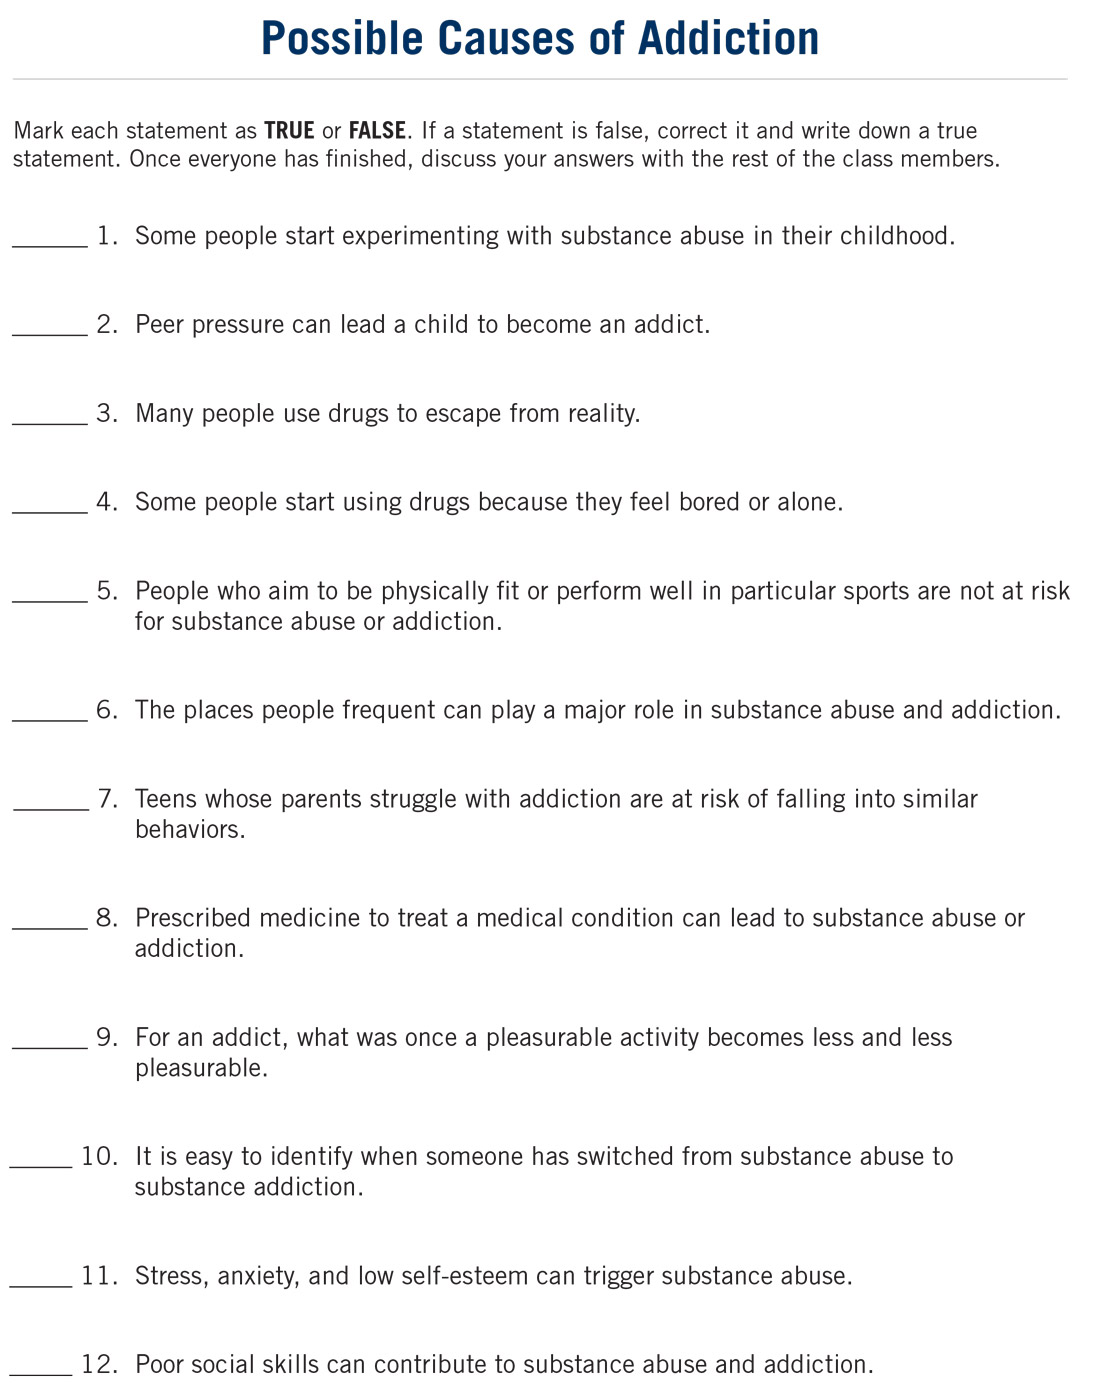 Possible Causes of Addiction Worksheet